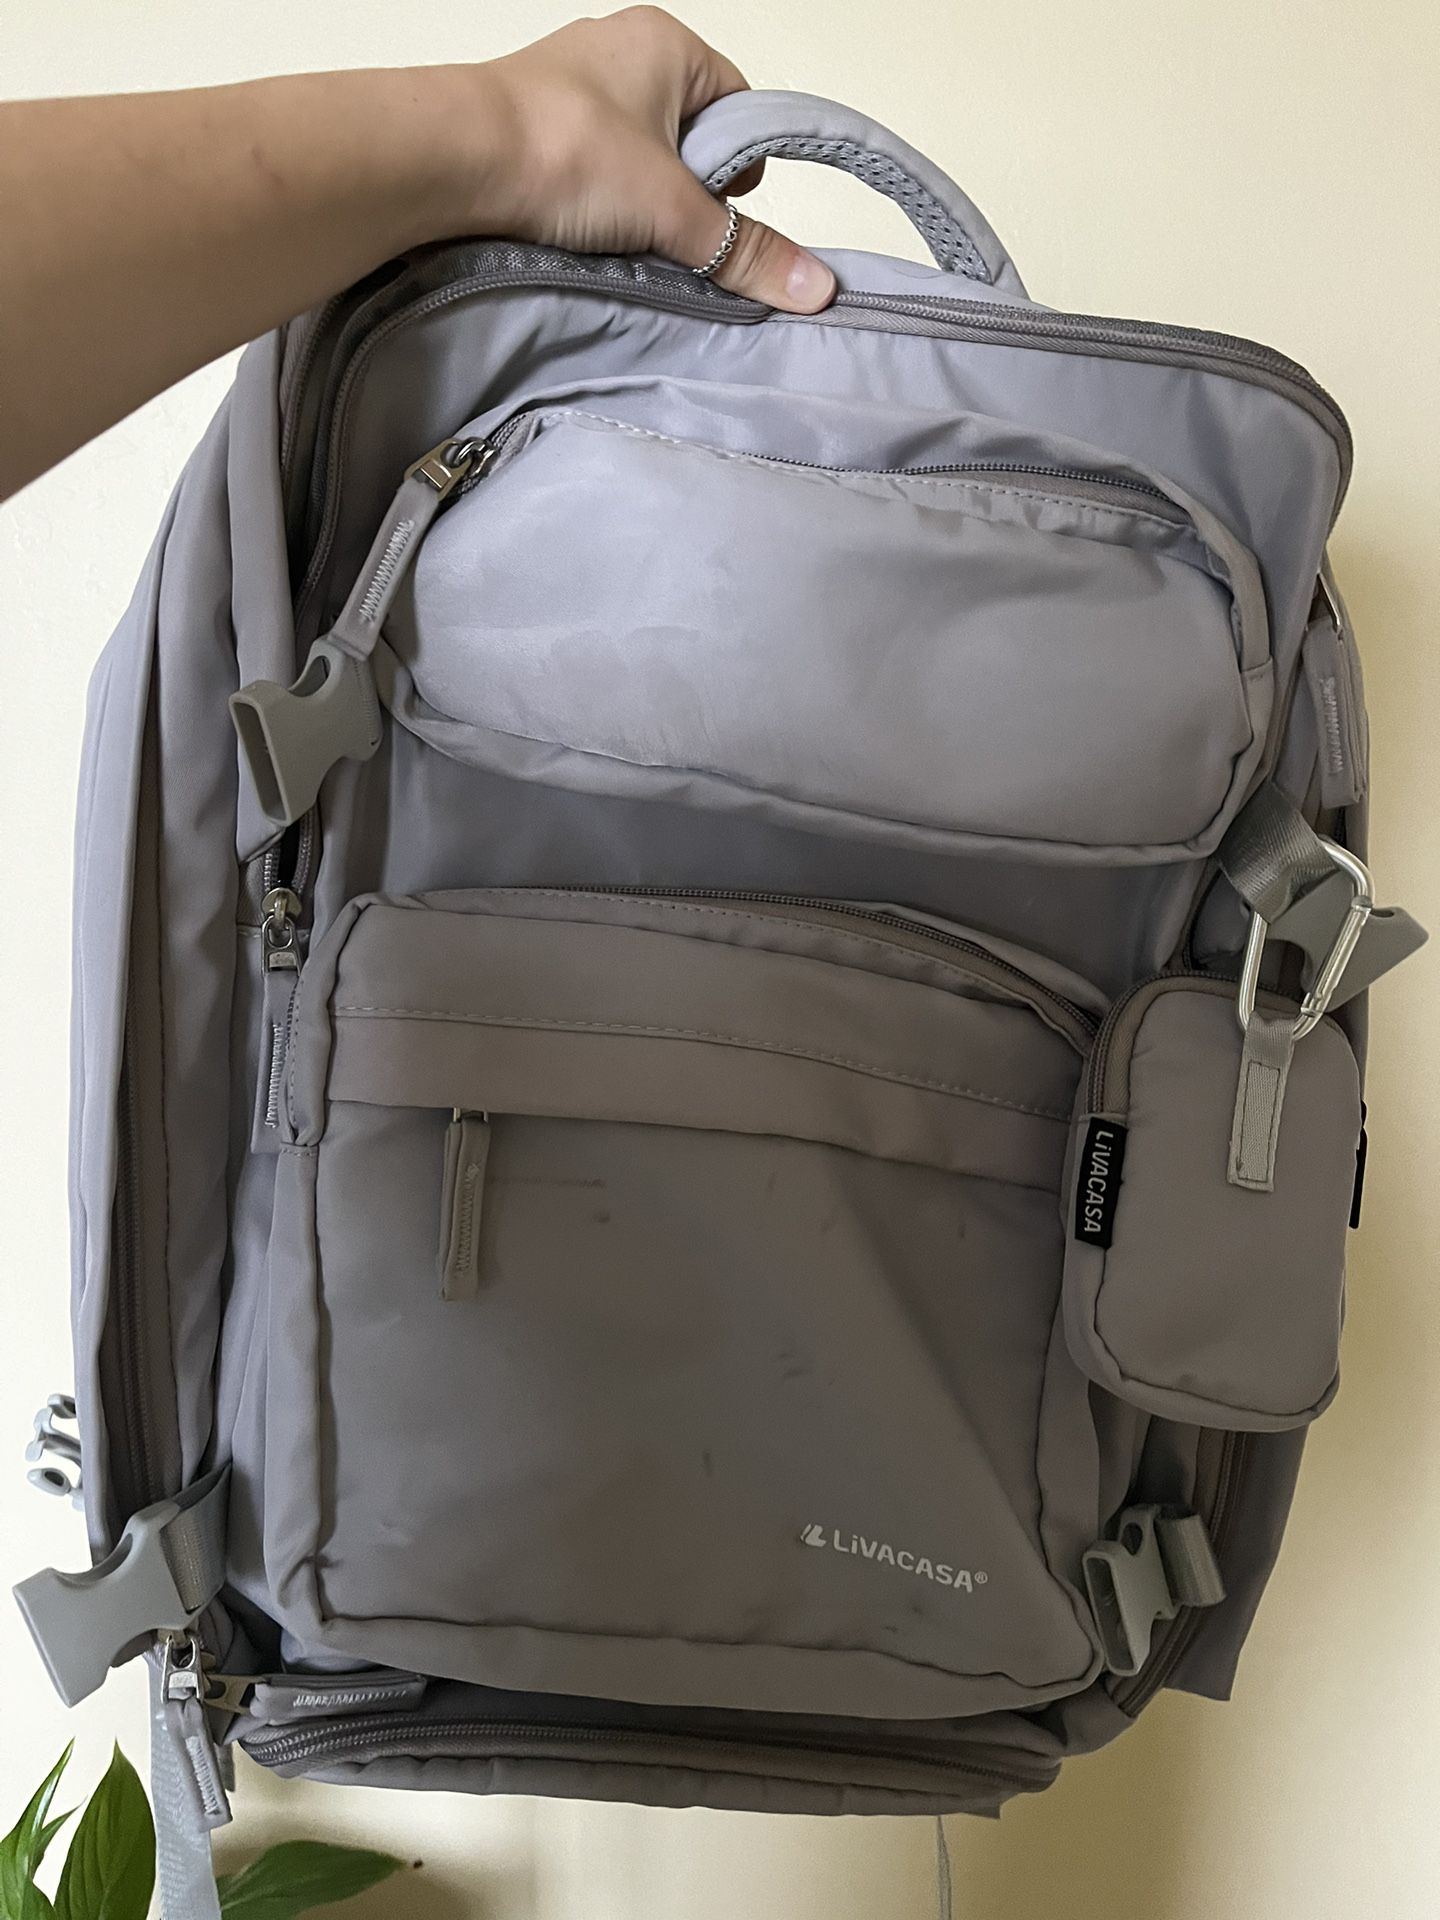 Carry On Travel Backpack